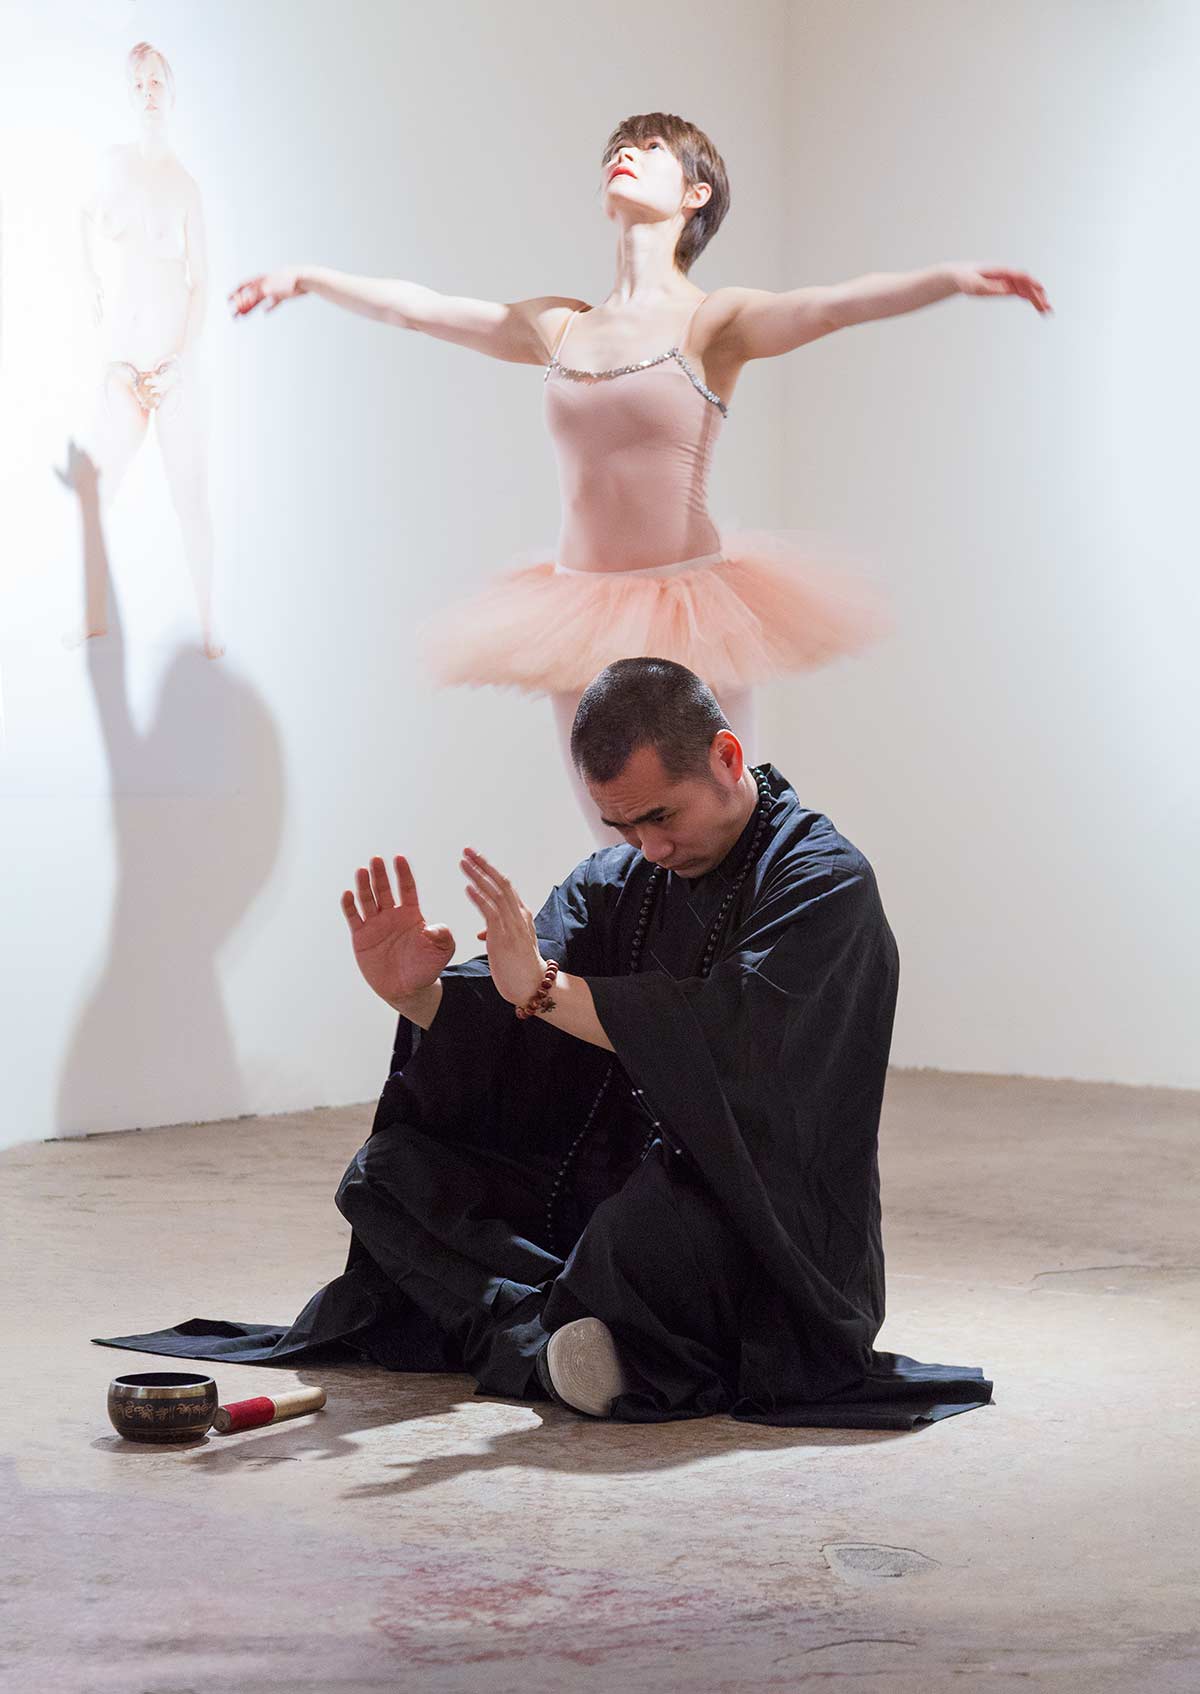 Chun Hua Catherine Dong invited a ballerina, a dominatrix, and a monk to improvise a performance at an exhibition opening in Montreal. the ballerina is dancing while the monk is meditating  